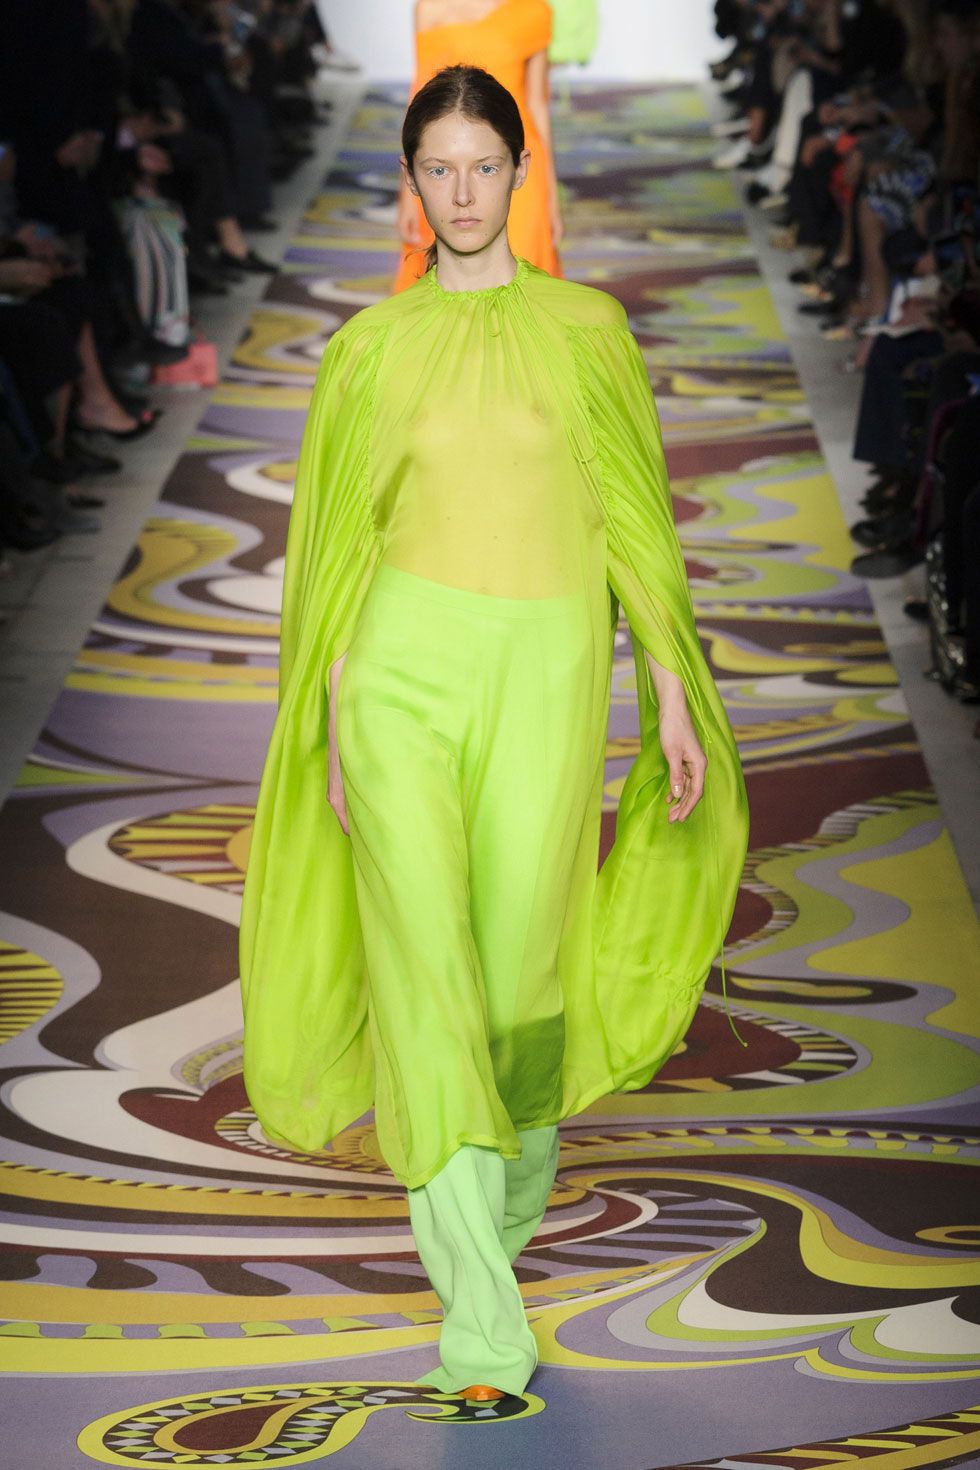 47 Looks From Emilio Pucci Fall 2017 MFW Show - Emilio Pucci Runway at ...